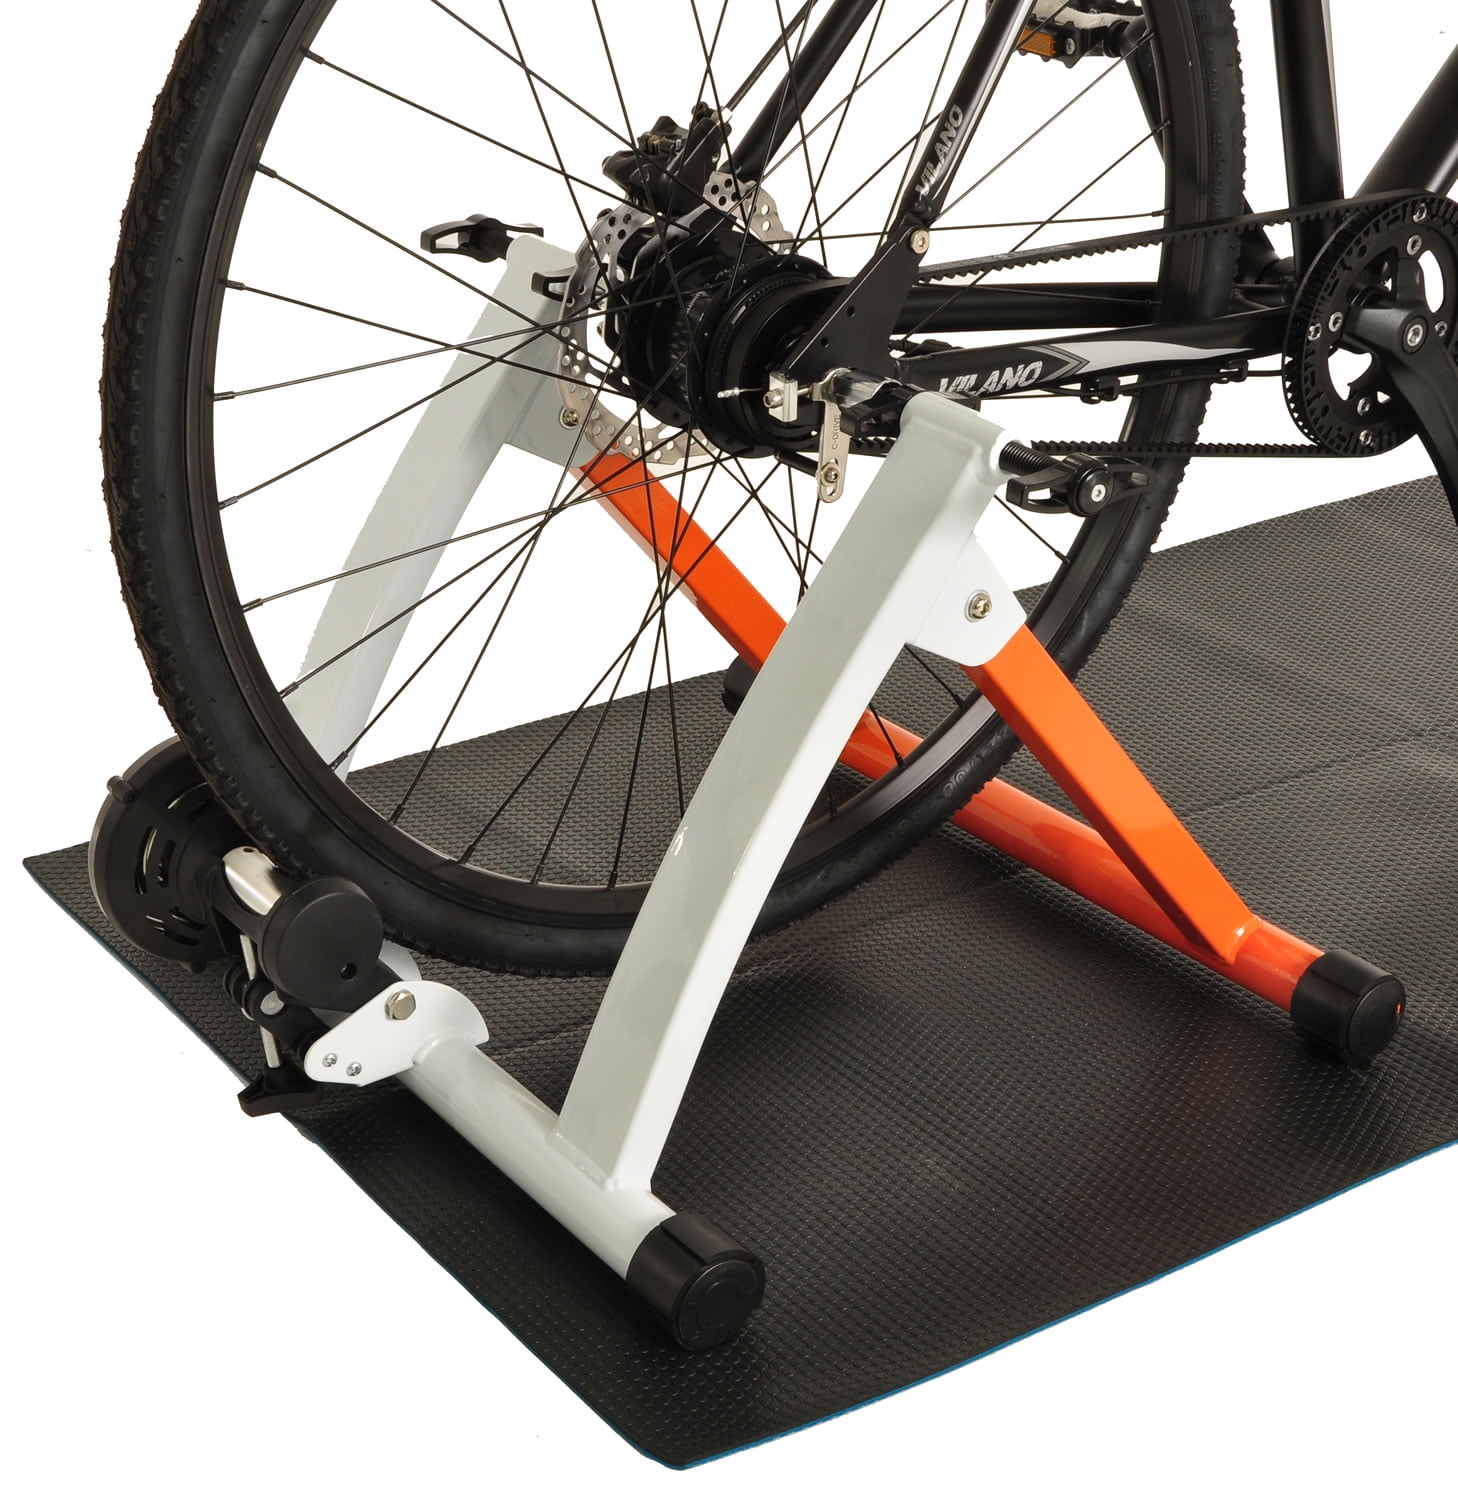 with Front Block Riser & Skewers Stationary Cycling Bike Training Stand for Indoor Riding Converter Mount CyclingDeal Bicycle Bike Indoor Home Exercise Wind Resistance Trainer 